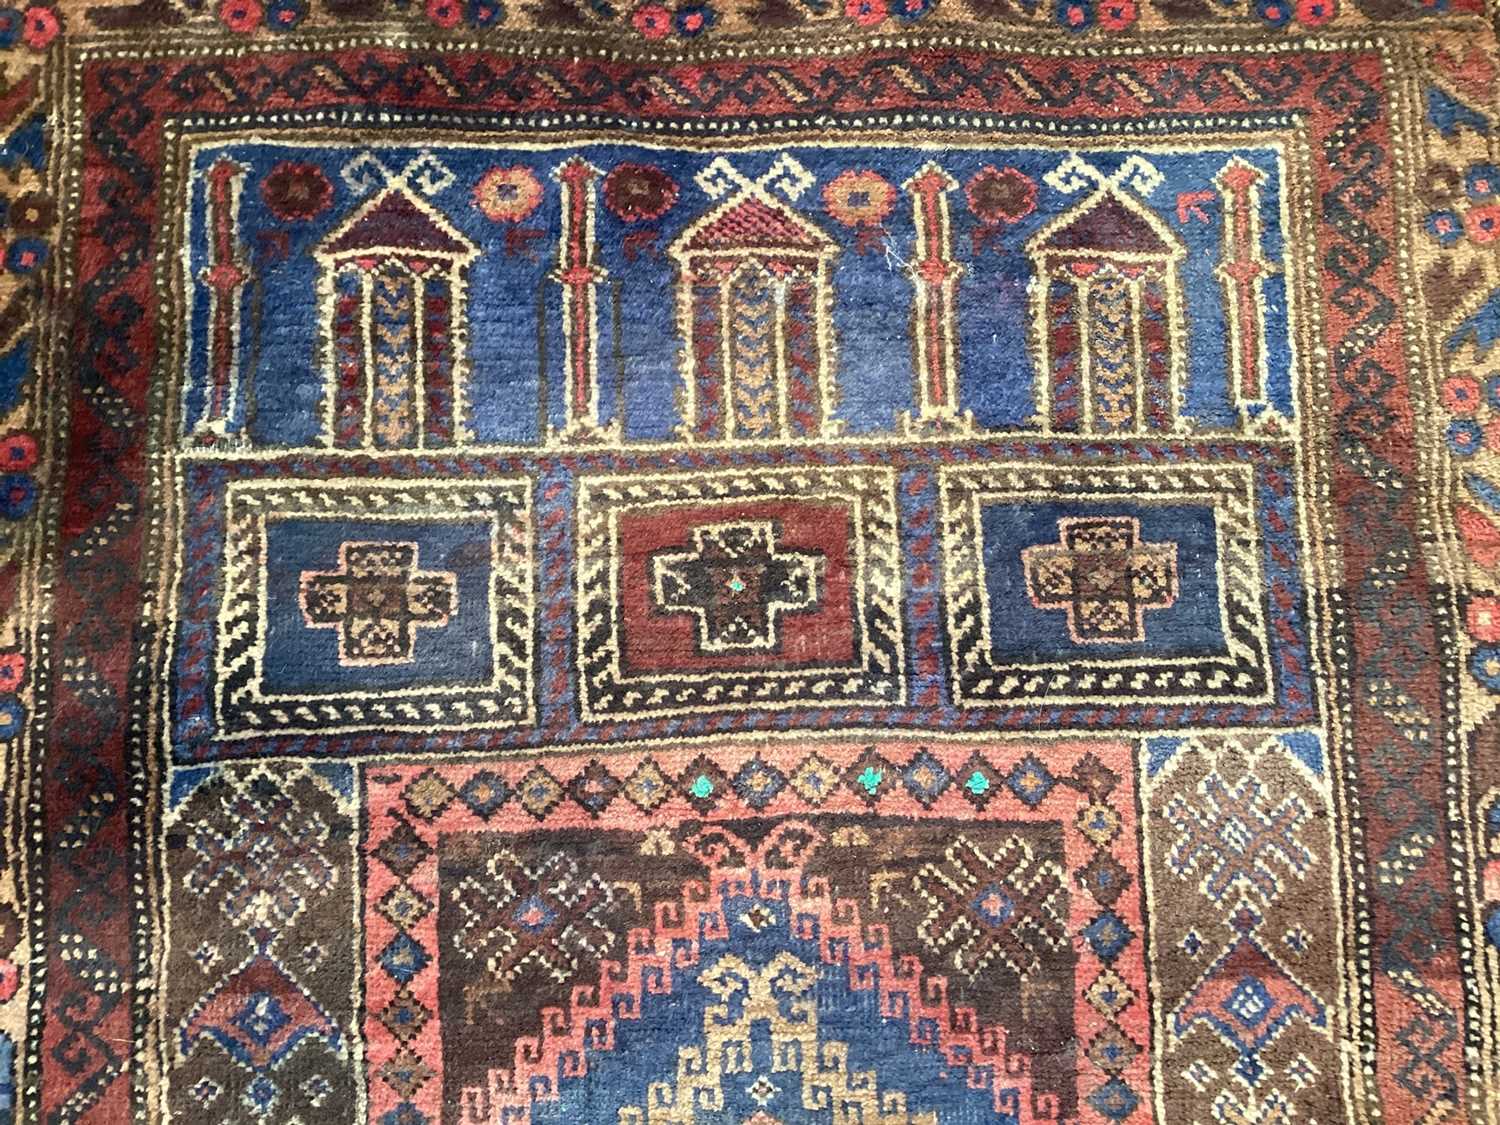 Eastern rug decorated with buildings on red, blue and brown ground, 128cm x 80cm - Image 3 of 4